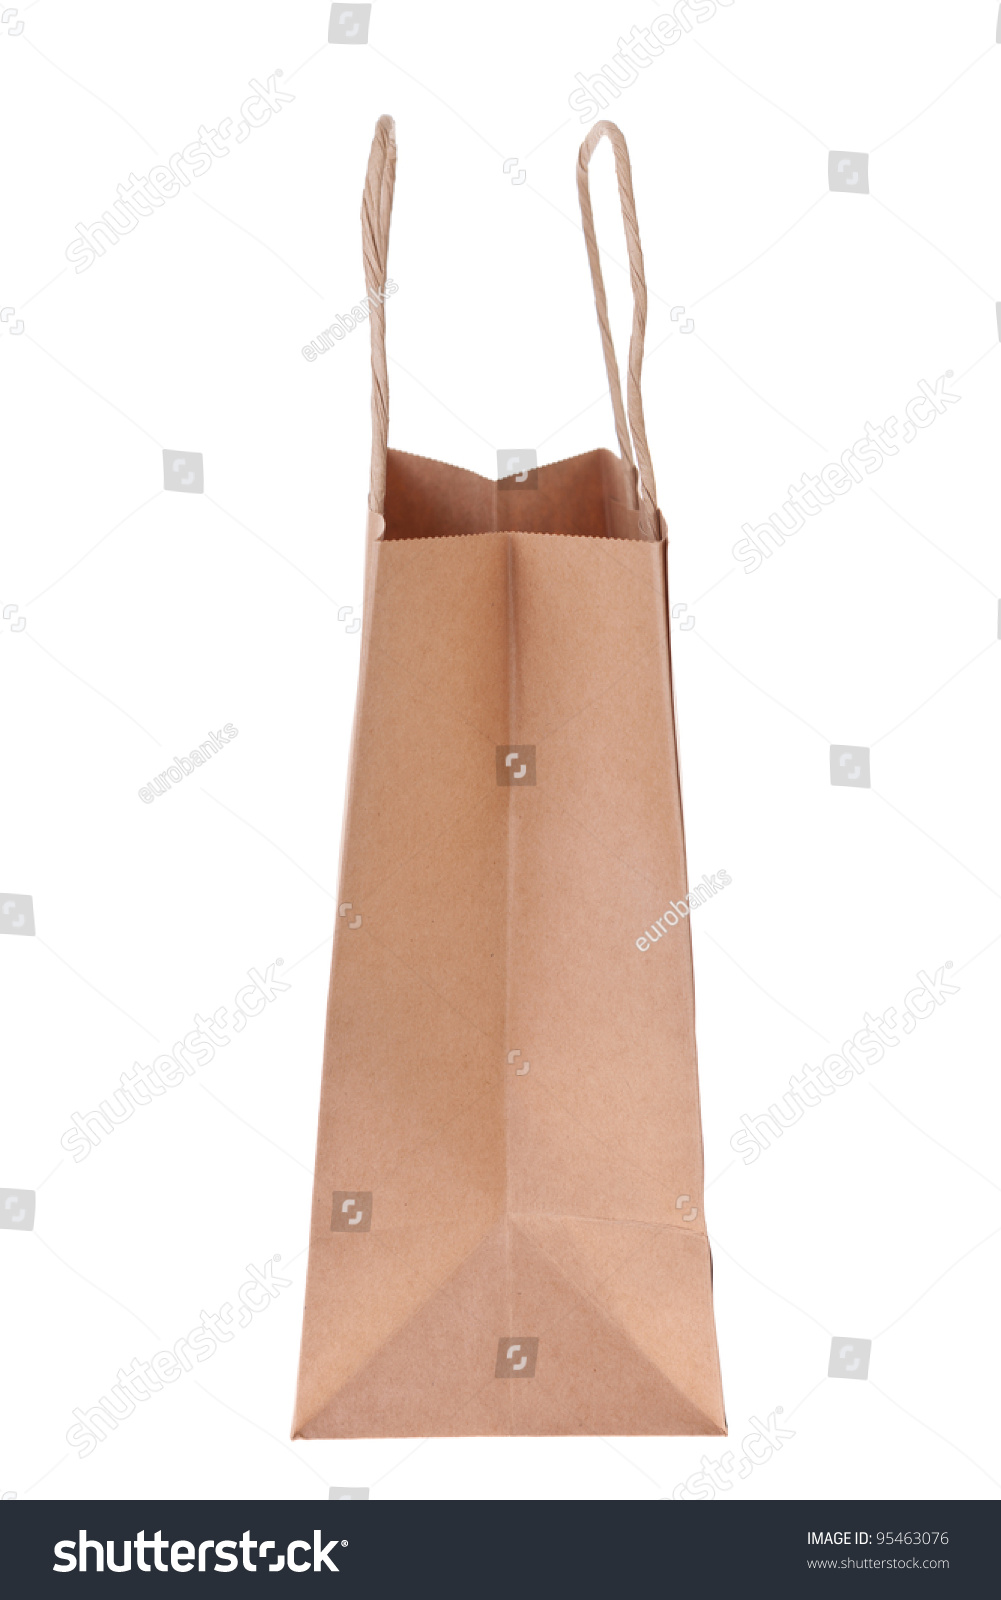 Download Brown Paper Shopping Bag Side View Stock Photo 95463076 ...